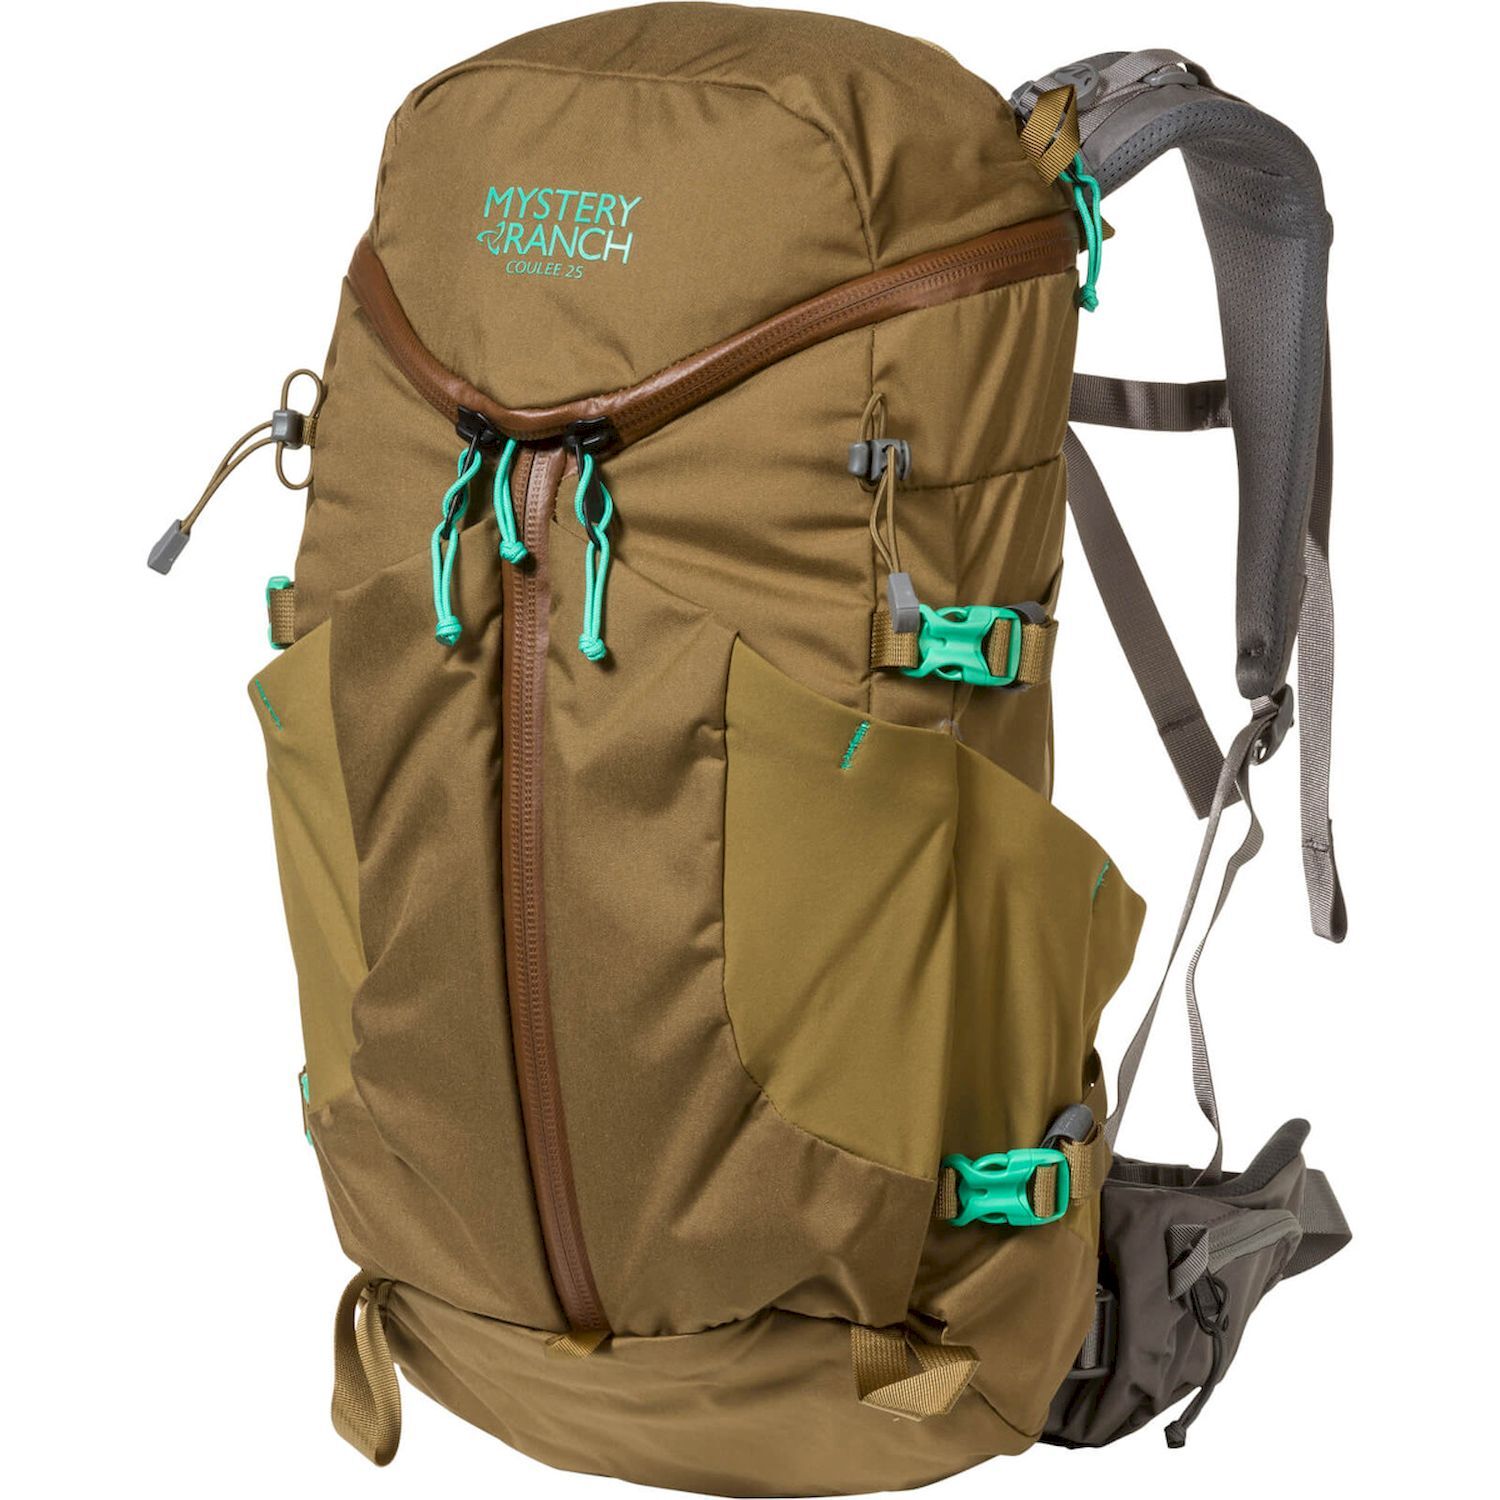 Mystery Ranch Coulee 25 - Hiking backpack - Women's